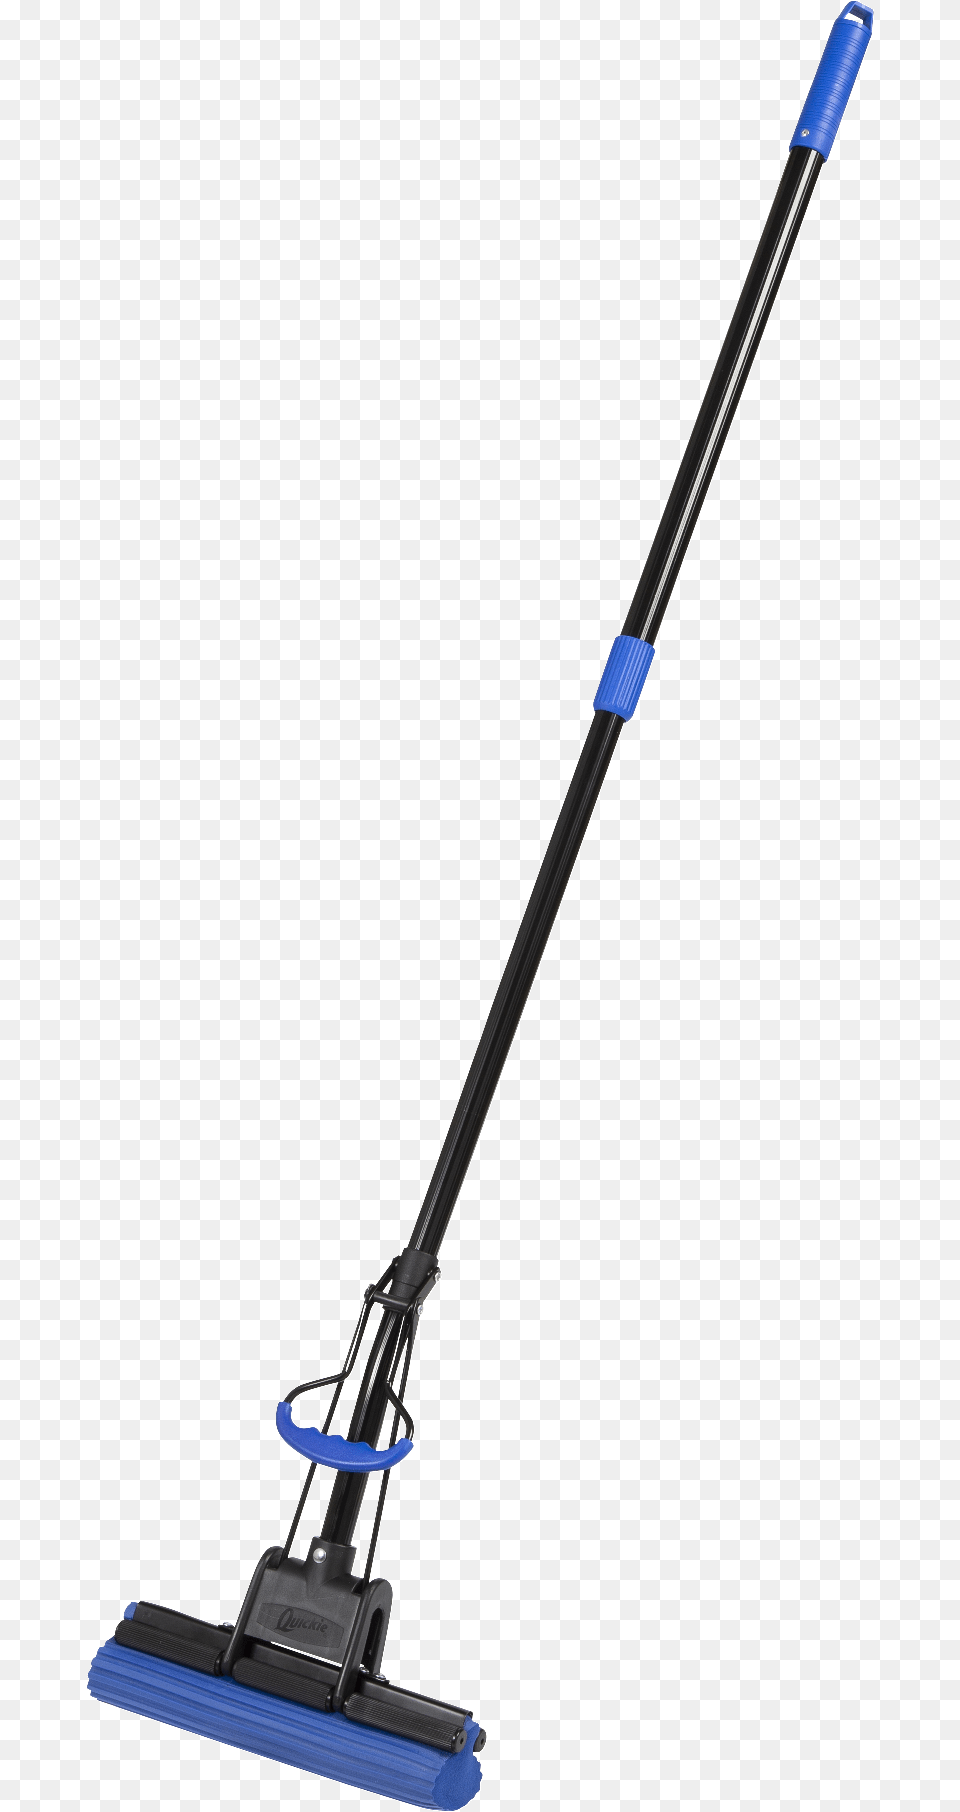 Quickie Bulldozer Pva Roller Mop Oates Aqua Broom, Sword, Weapon, Device, Electrical Device Free Transparent Png